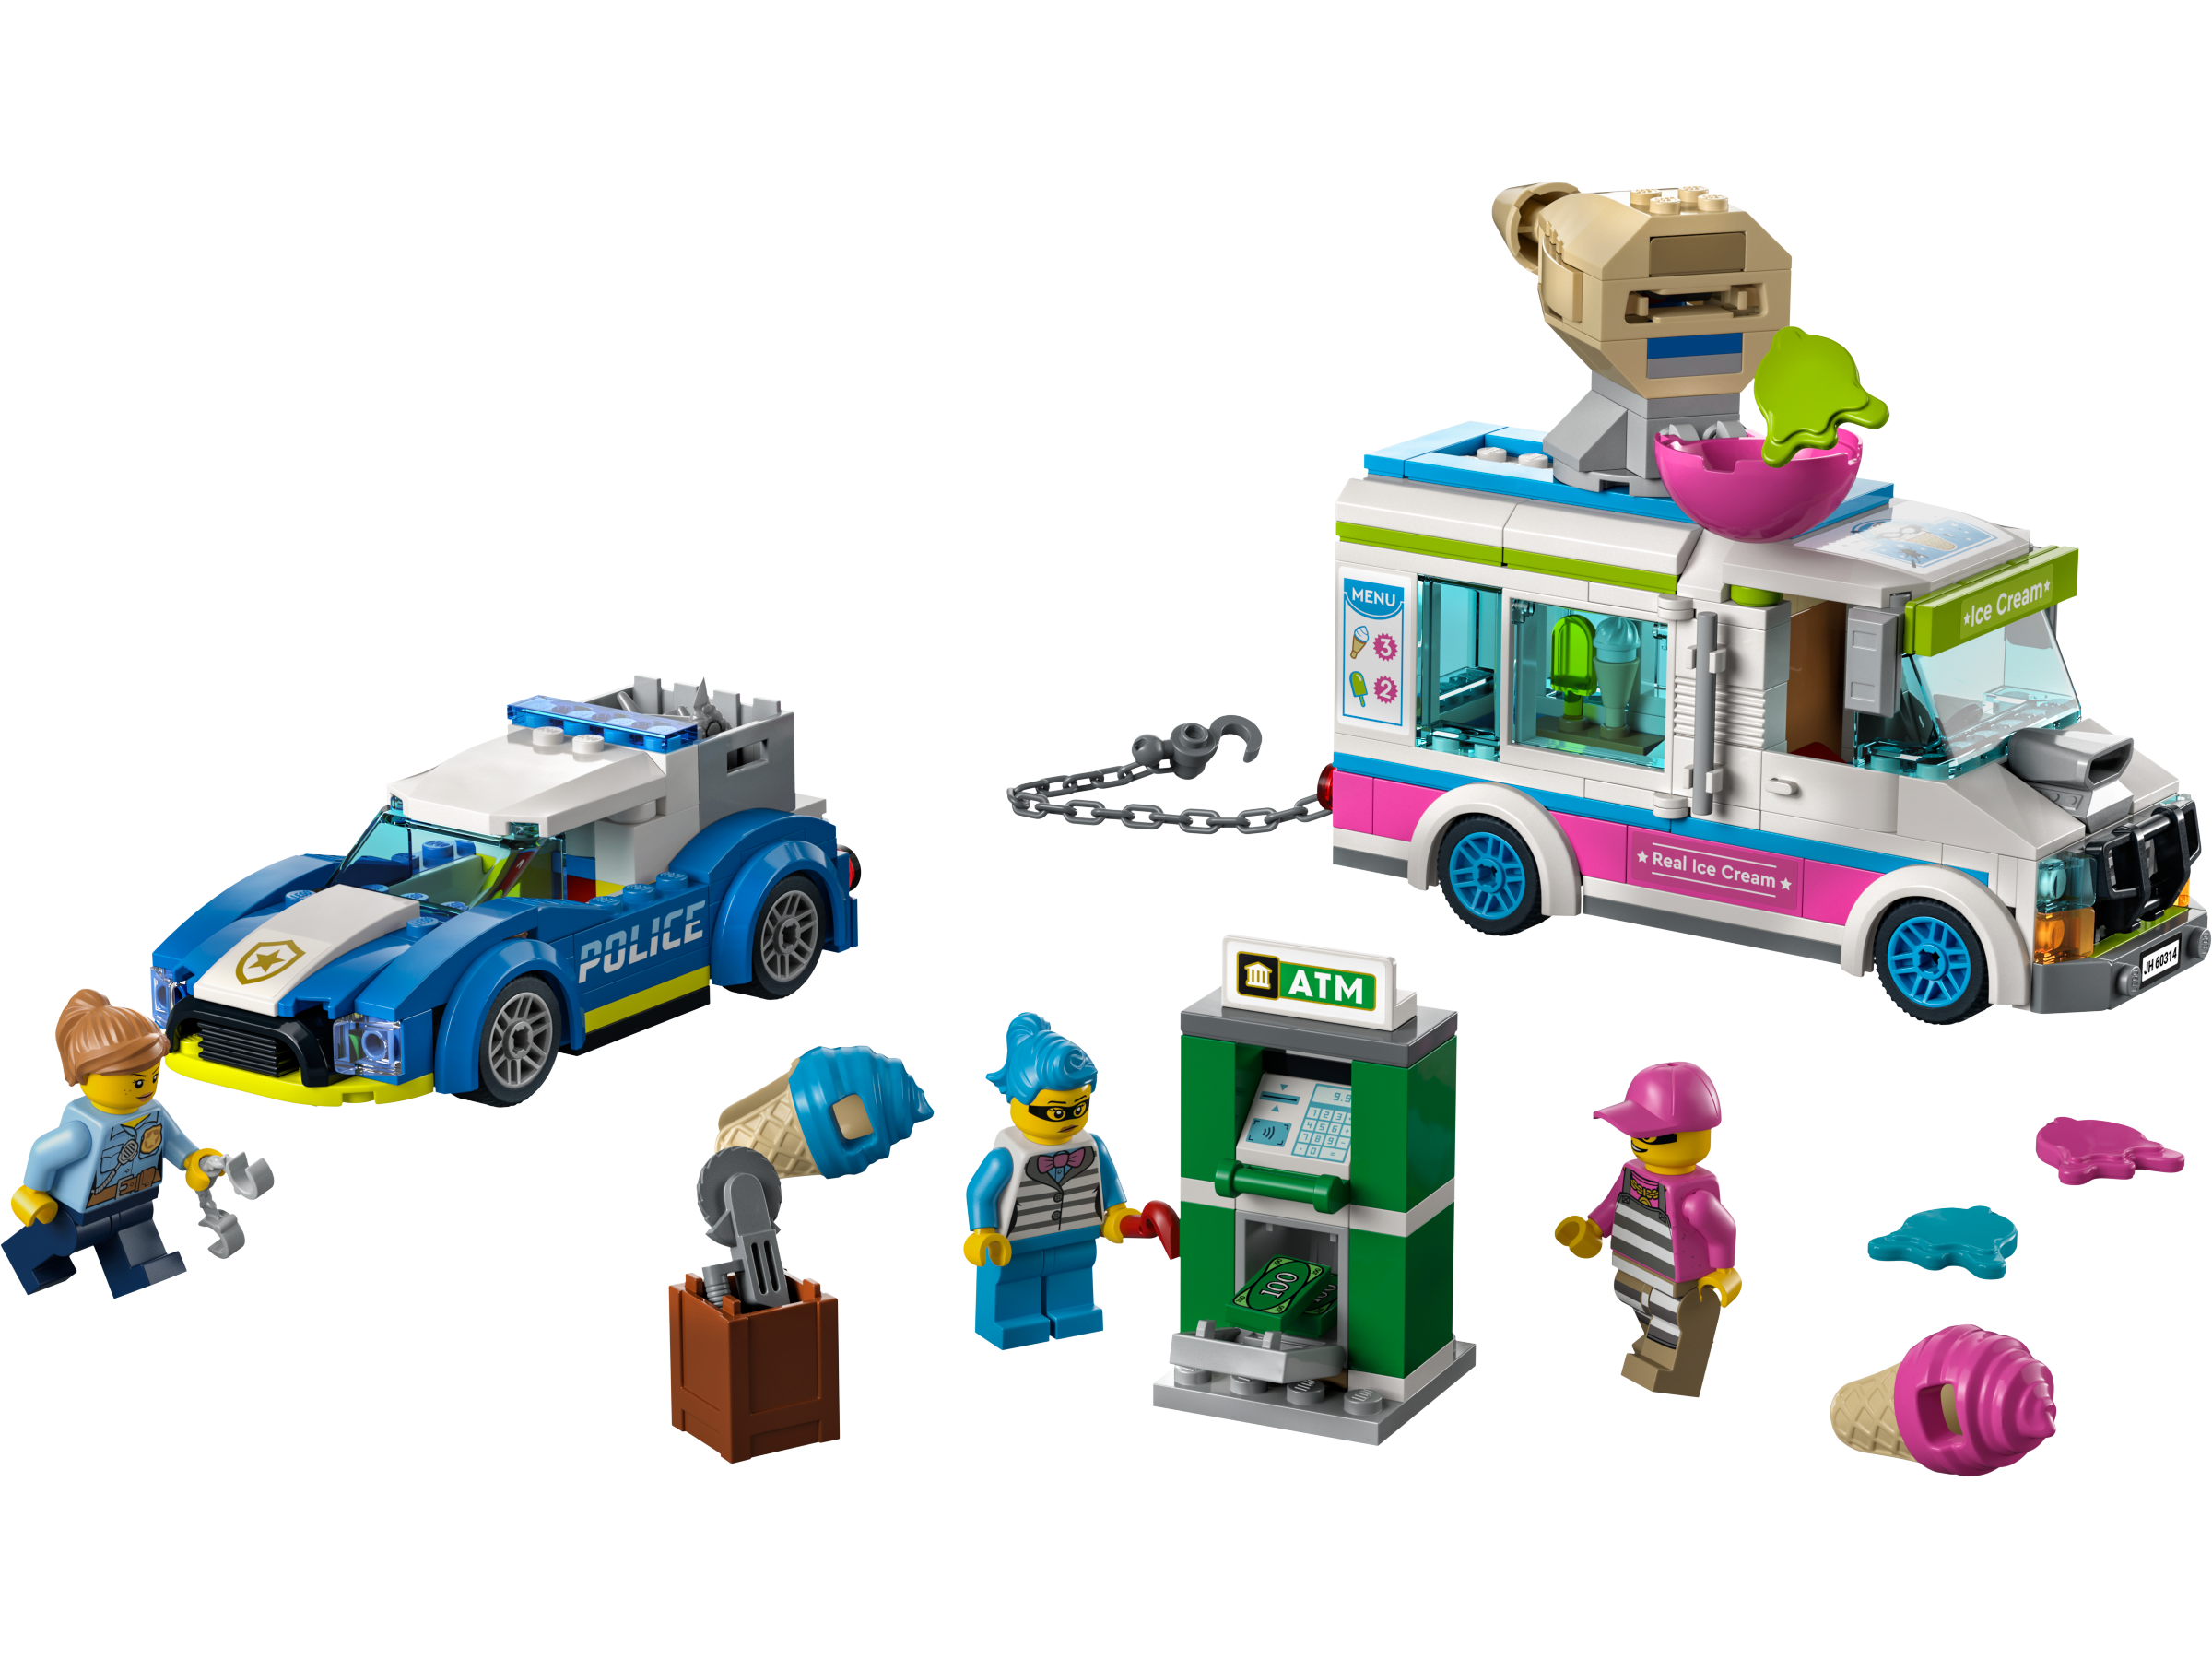 Ice Cream Truck Police 60314 | City | Buy online at the Official LEGO® Shop US